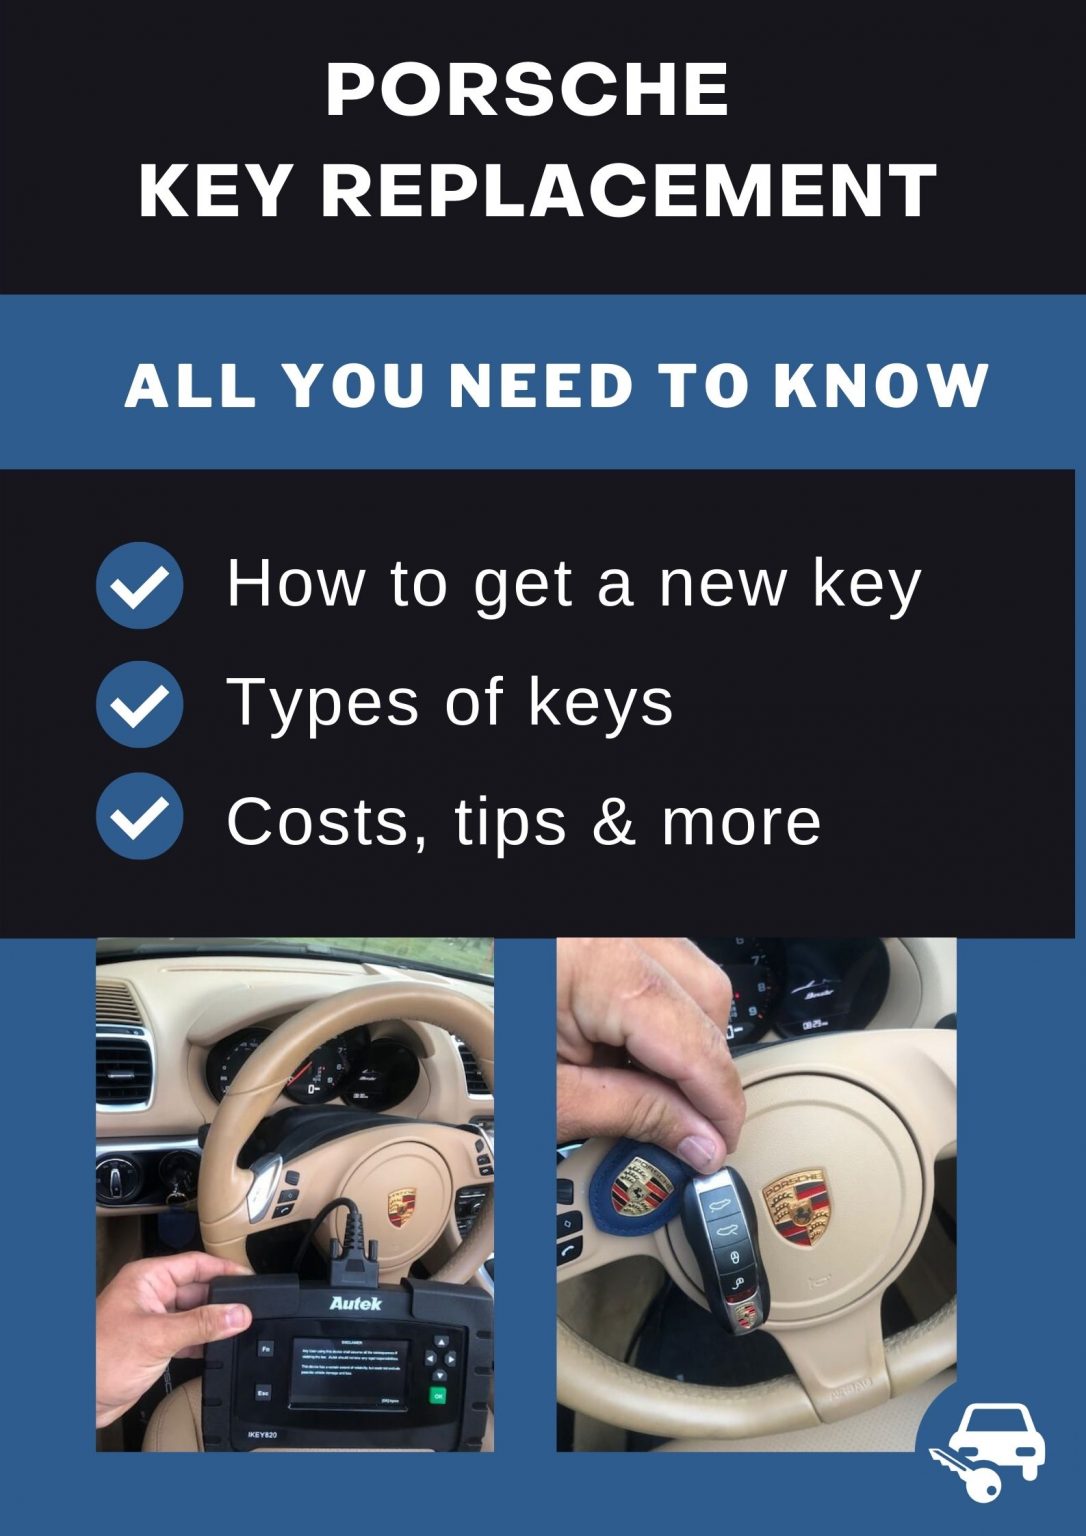 Porsche Car Keys Replacement - All The Information You Need To Know